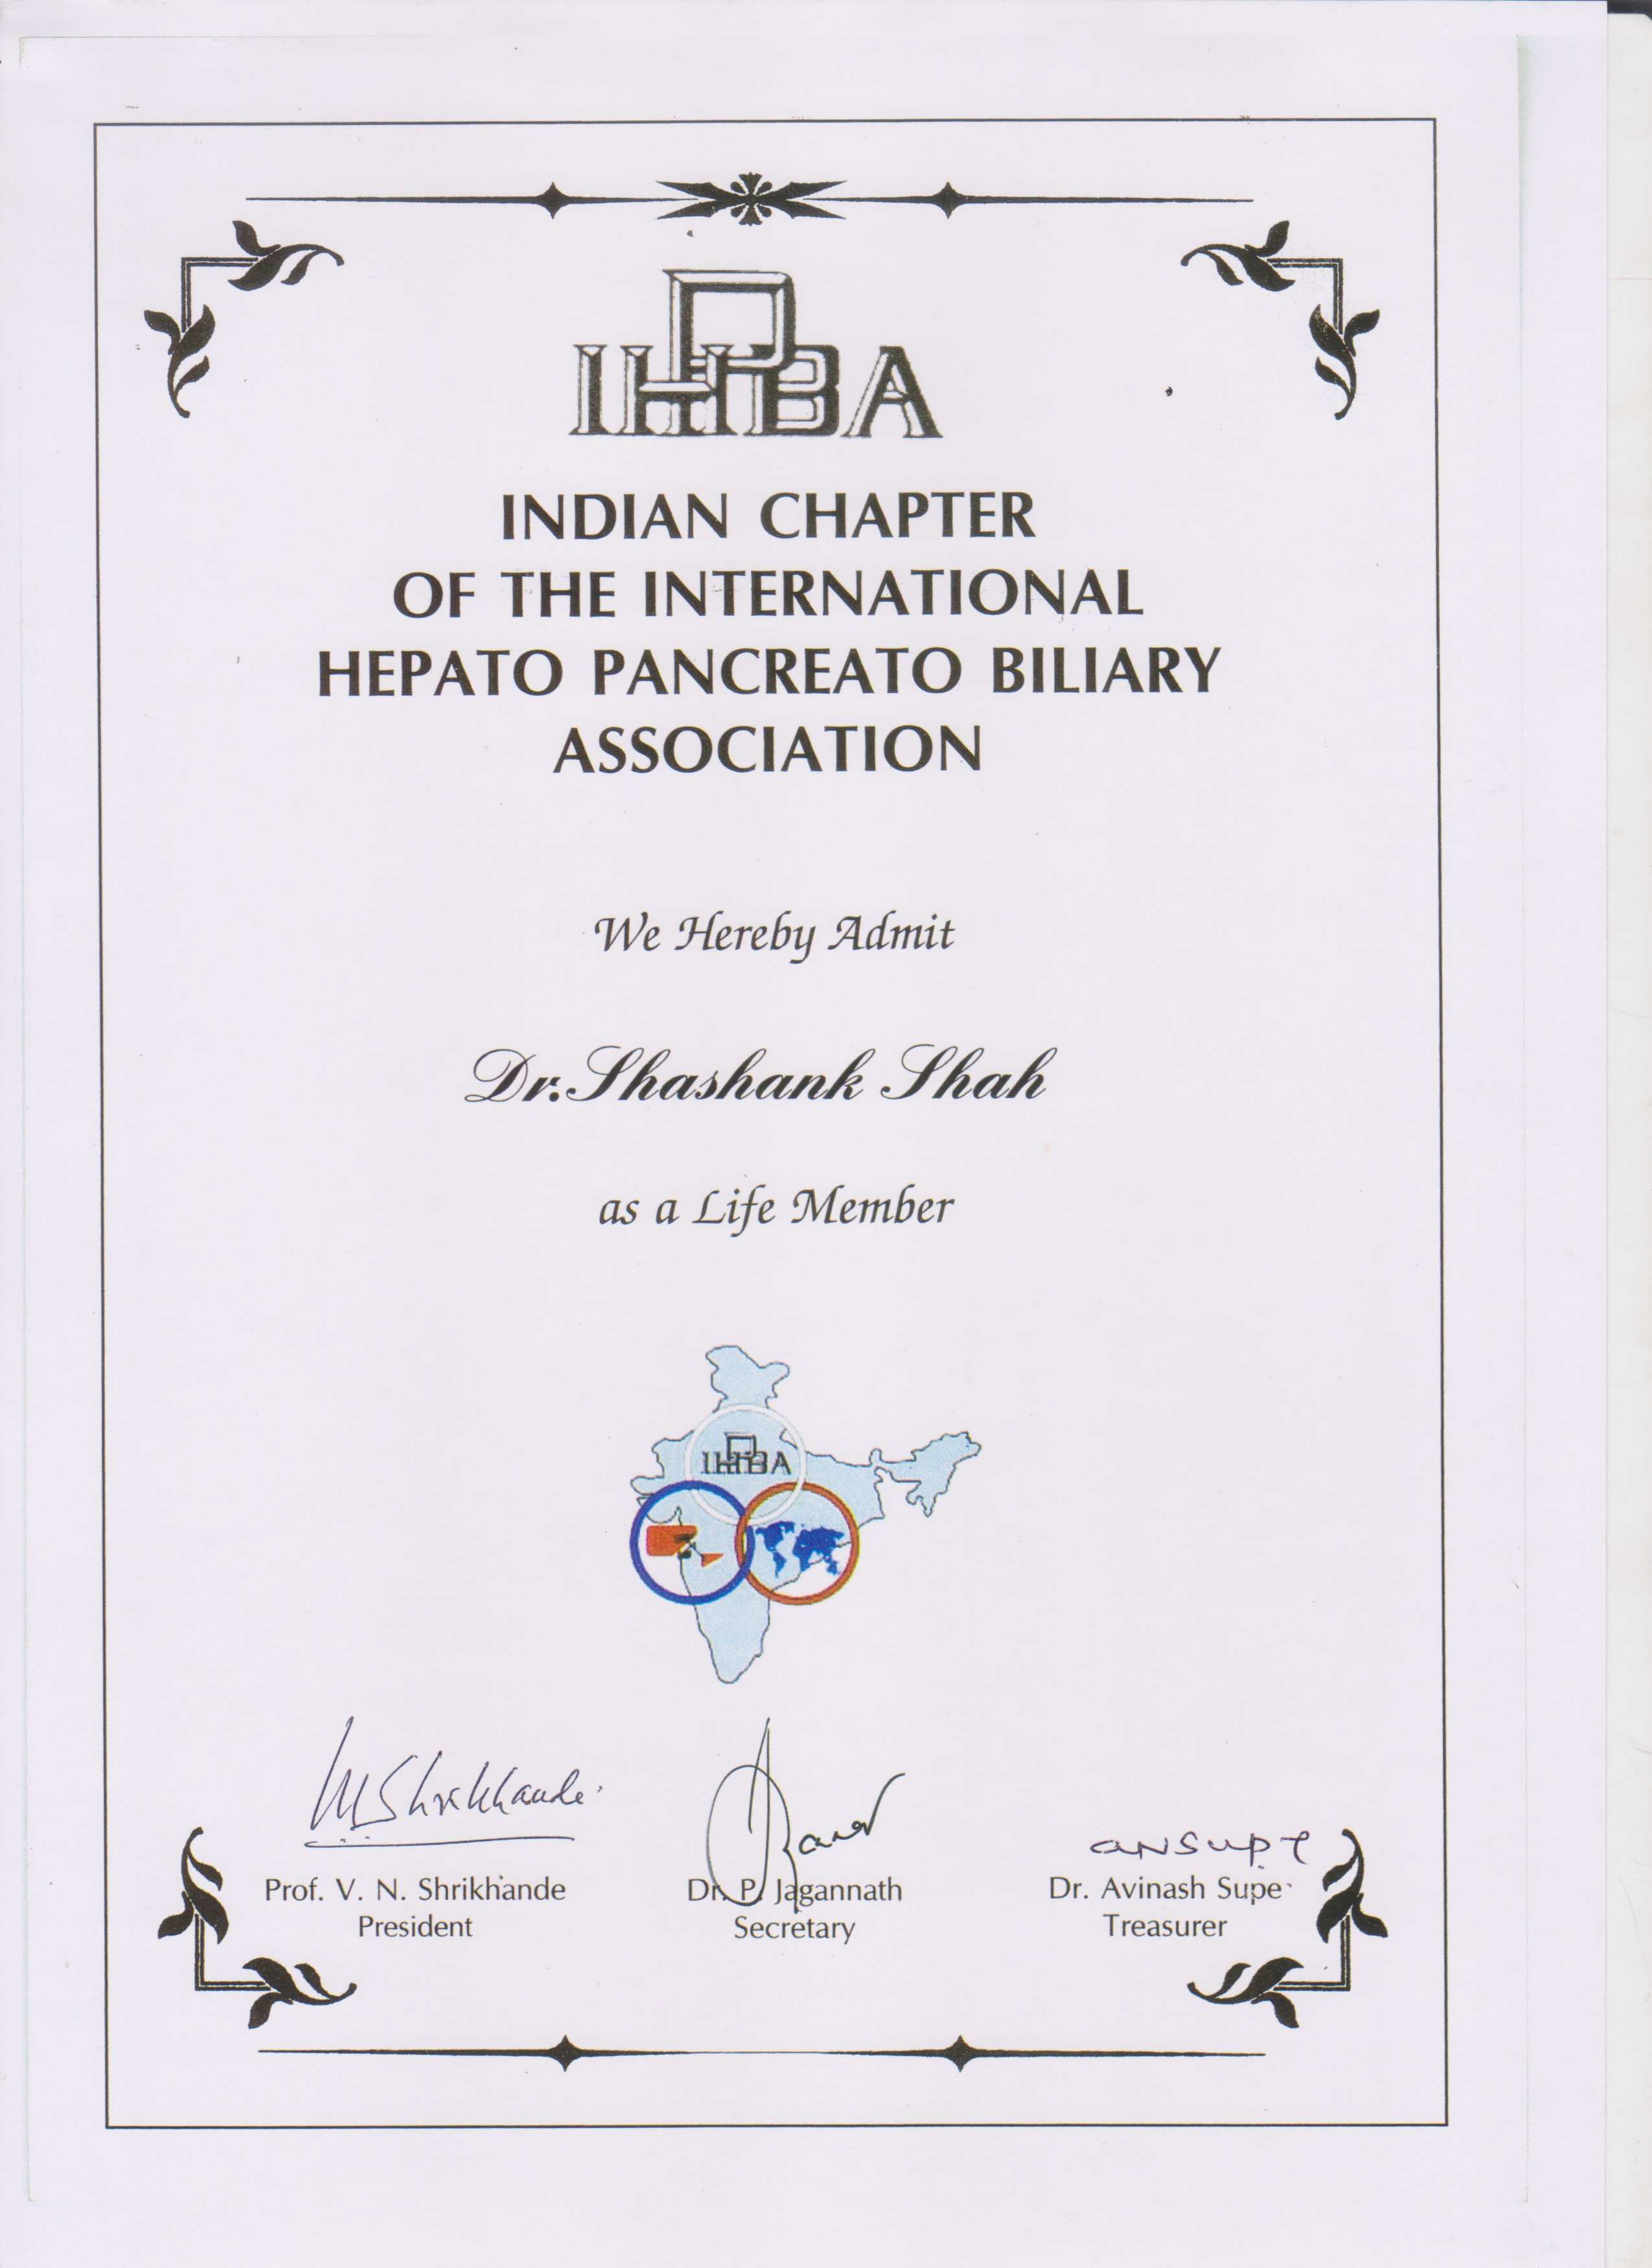 Dr Shashank Shah is the Life Member of the Indian Chapter of the International Hepato Pancreato Biliary Association (IHPBA) 